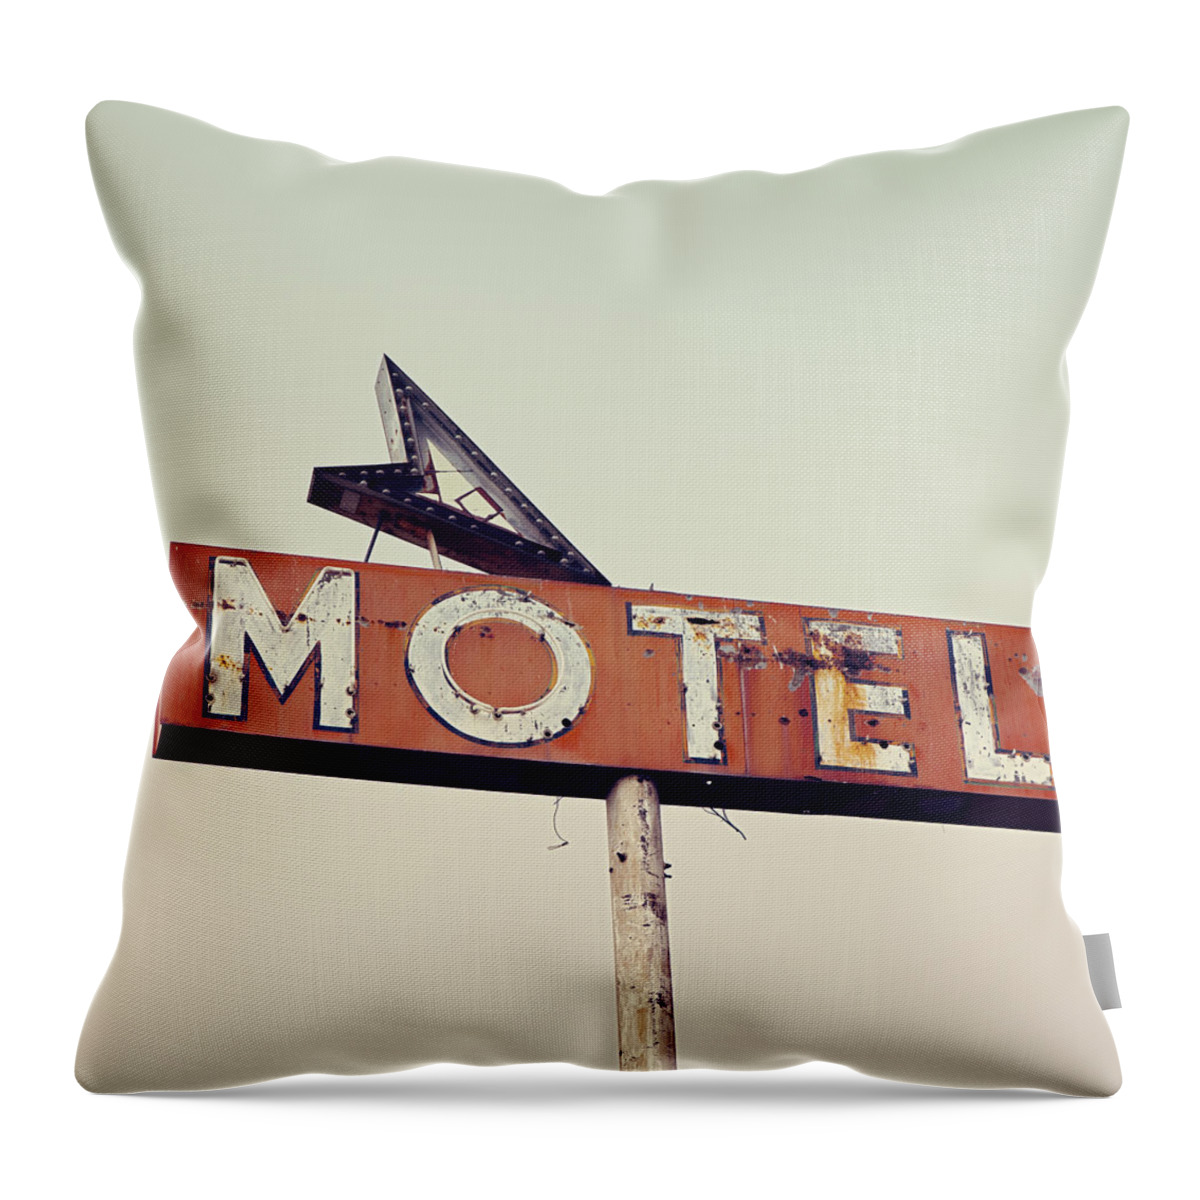 Motel Throw Pillow featuring the photograph Vacancy Vintage Motel Sign by Melanie Alexandra Price